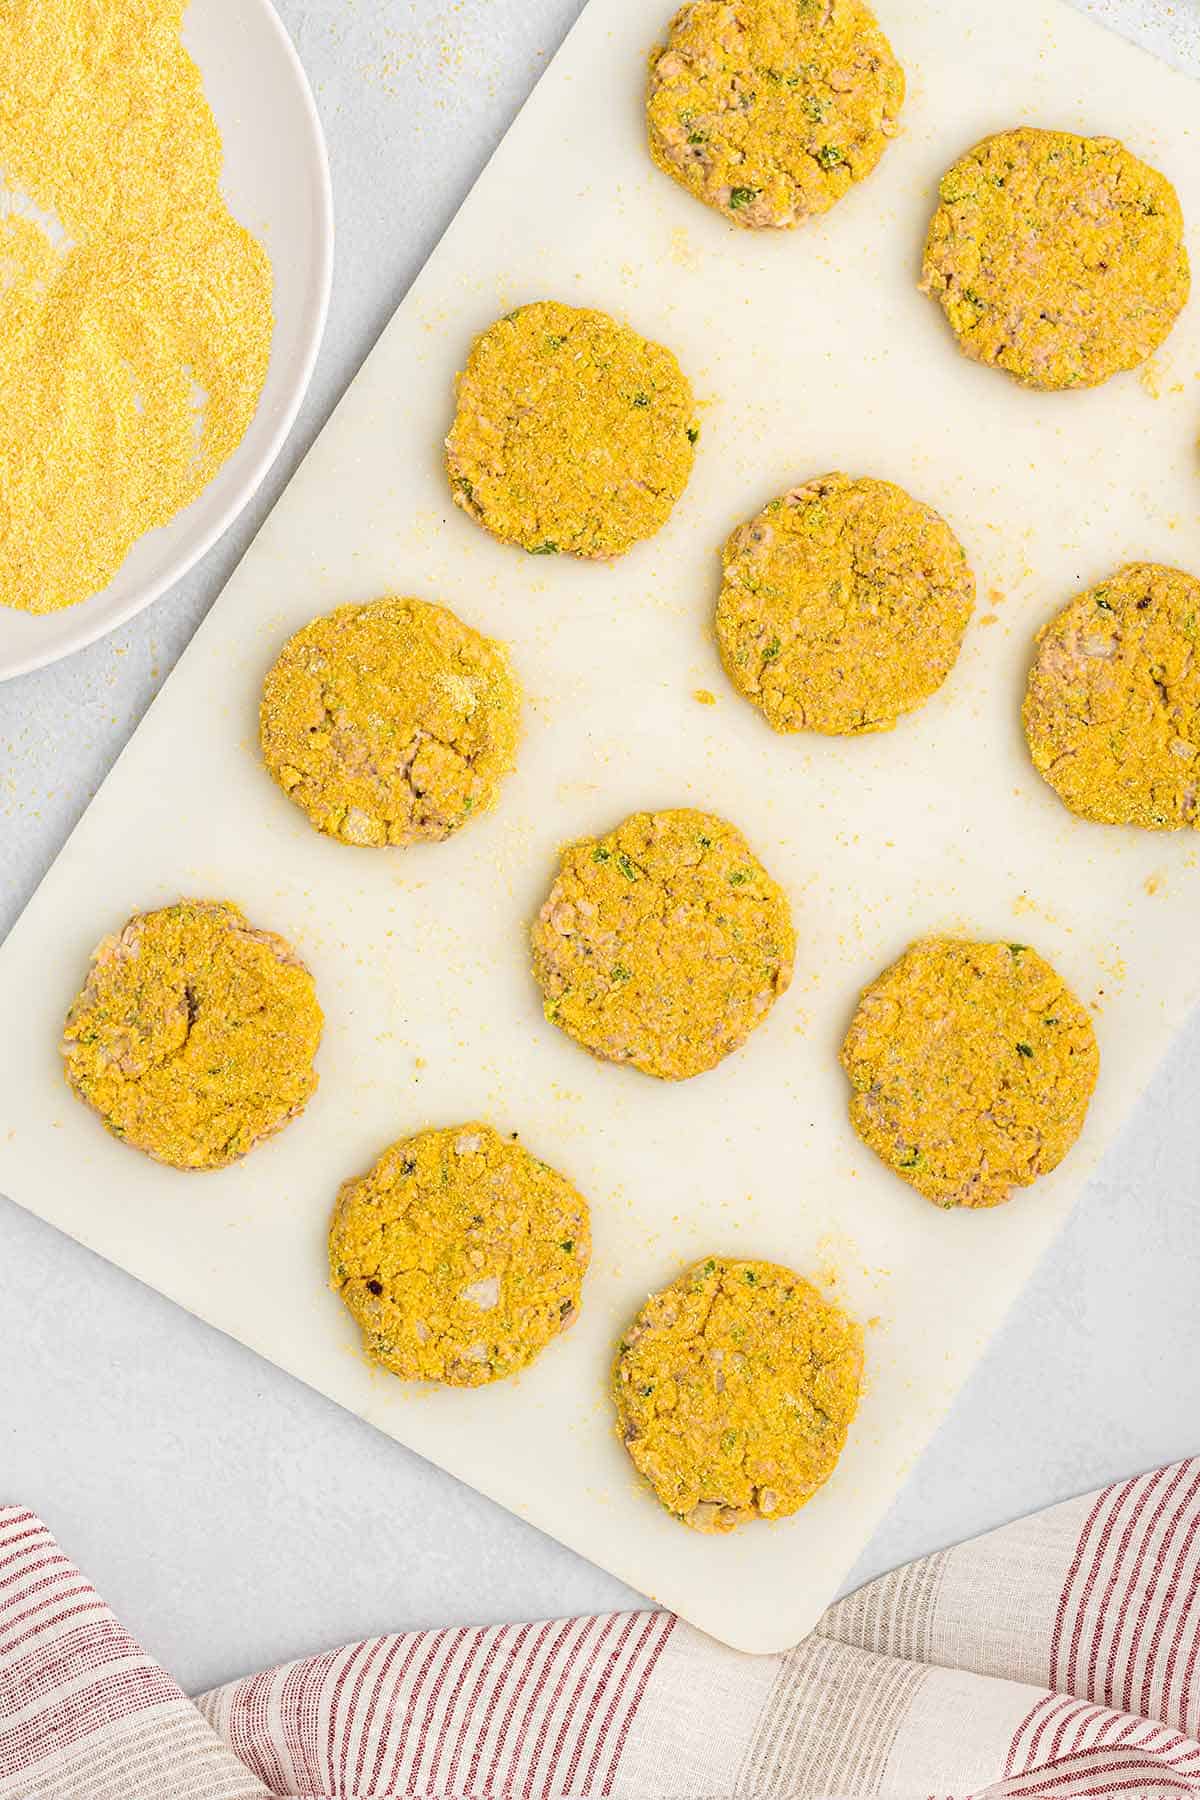 Salmon patties are coated with cornmeal breading.